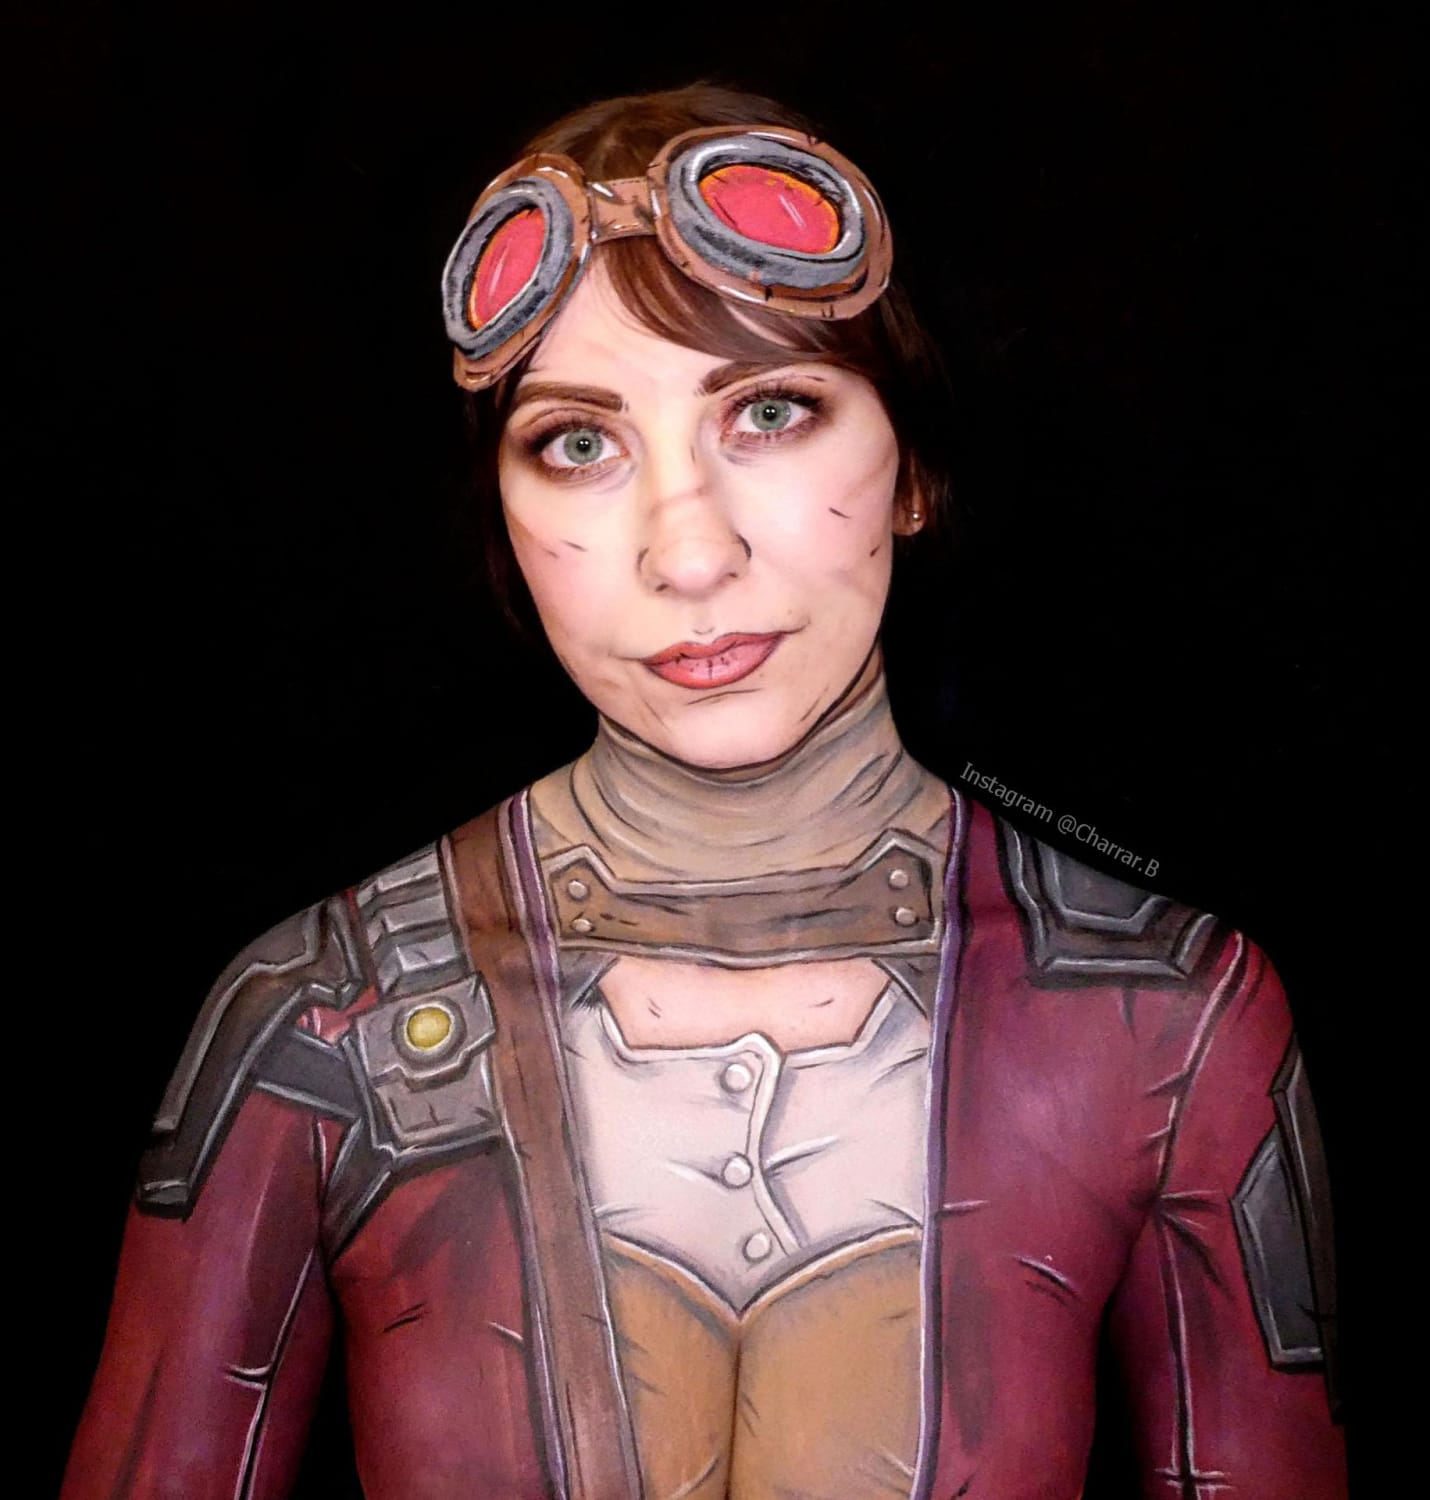 [Self] I bodypainted myself into Tannis from Borderlands 3. Hope you like it!